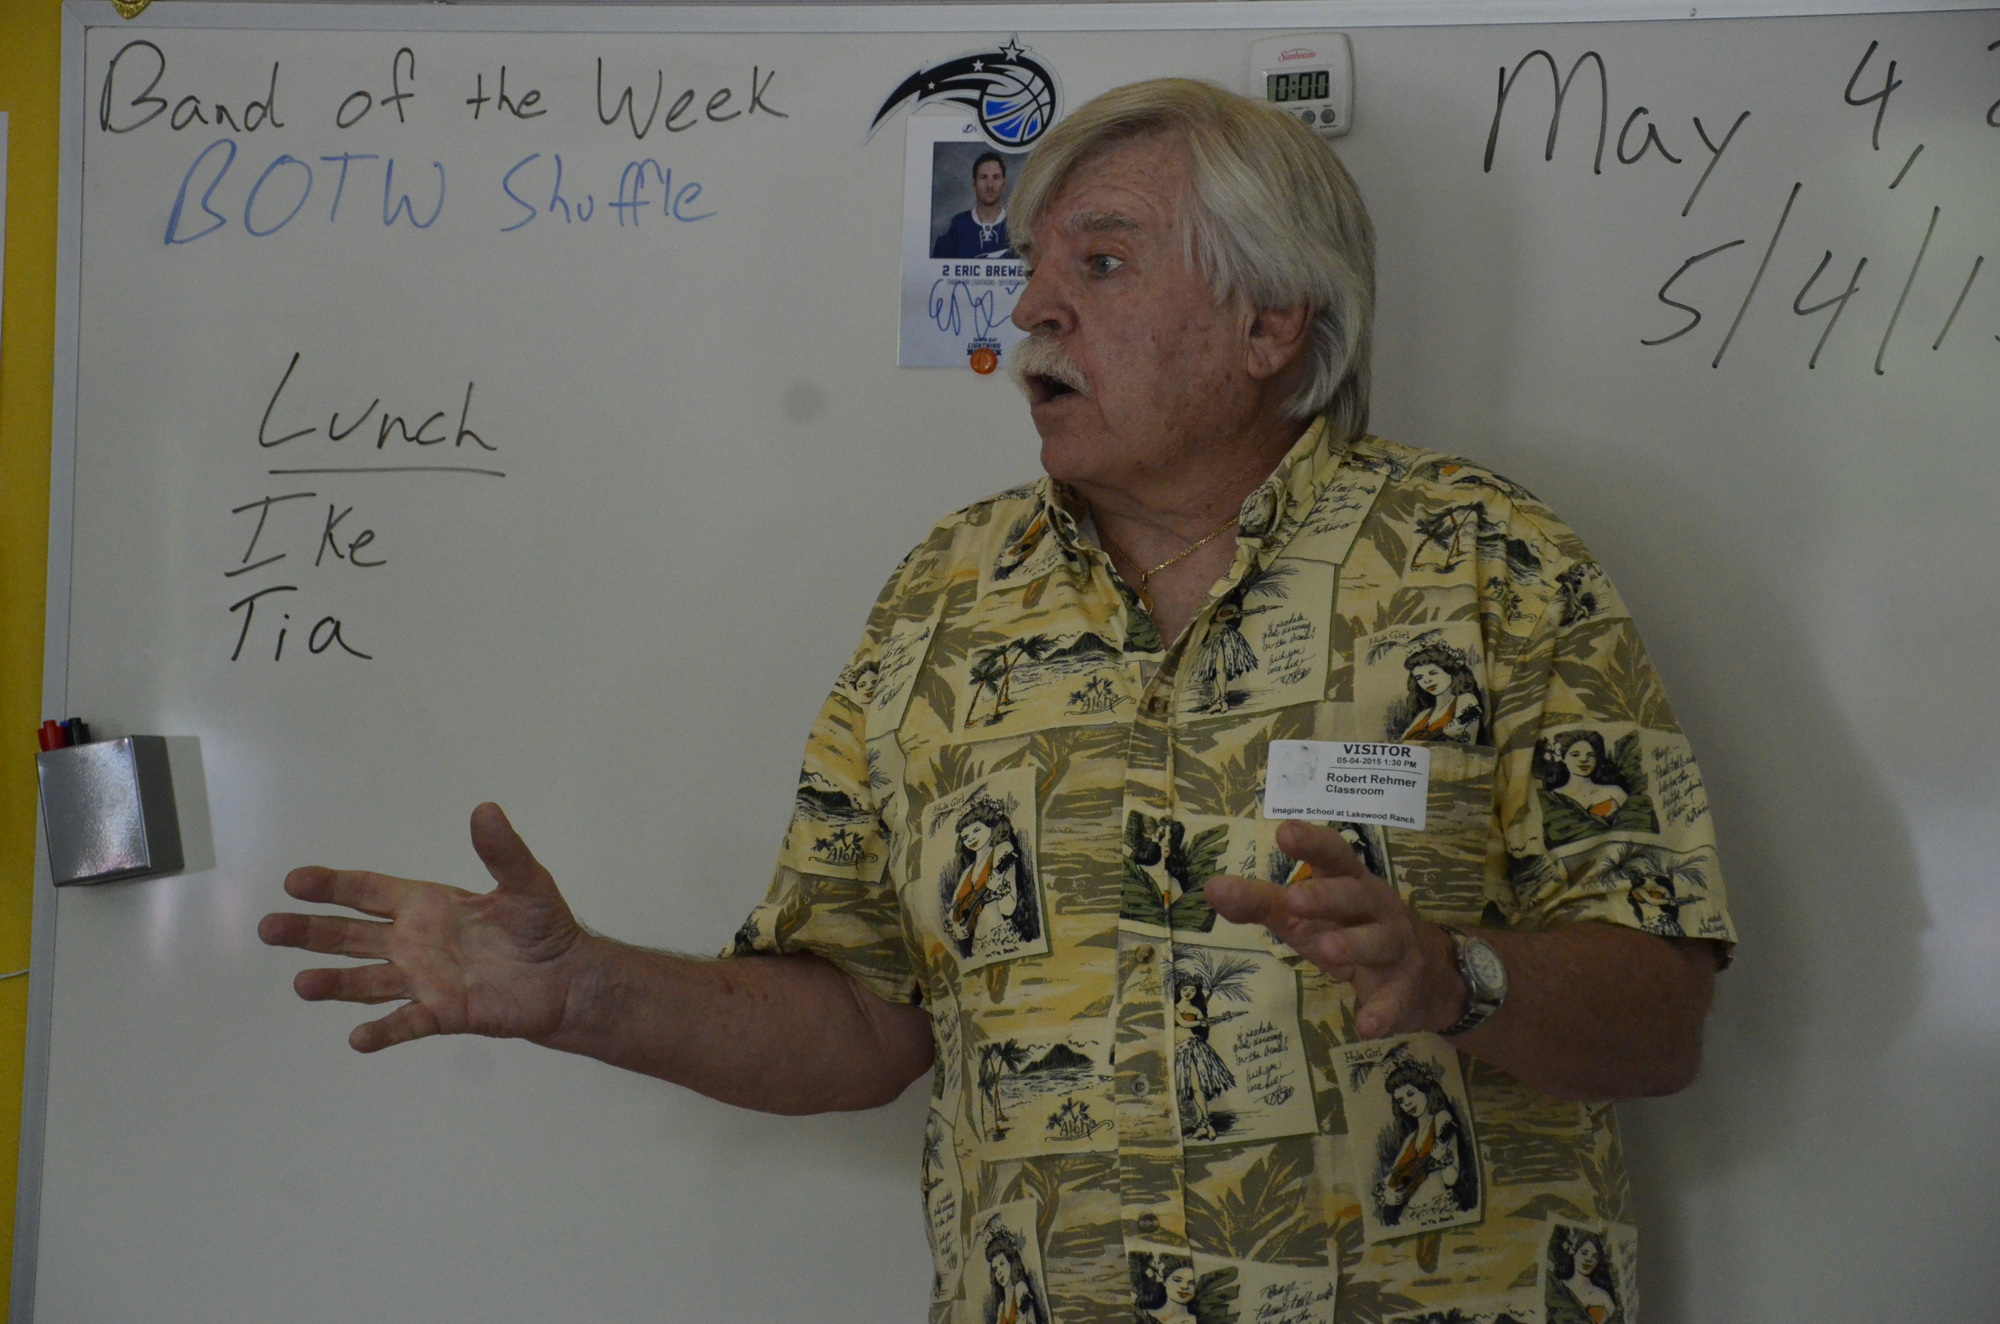 Retired sentinel Robert Rehmer warned students to be respectful at the Tomb monument.